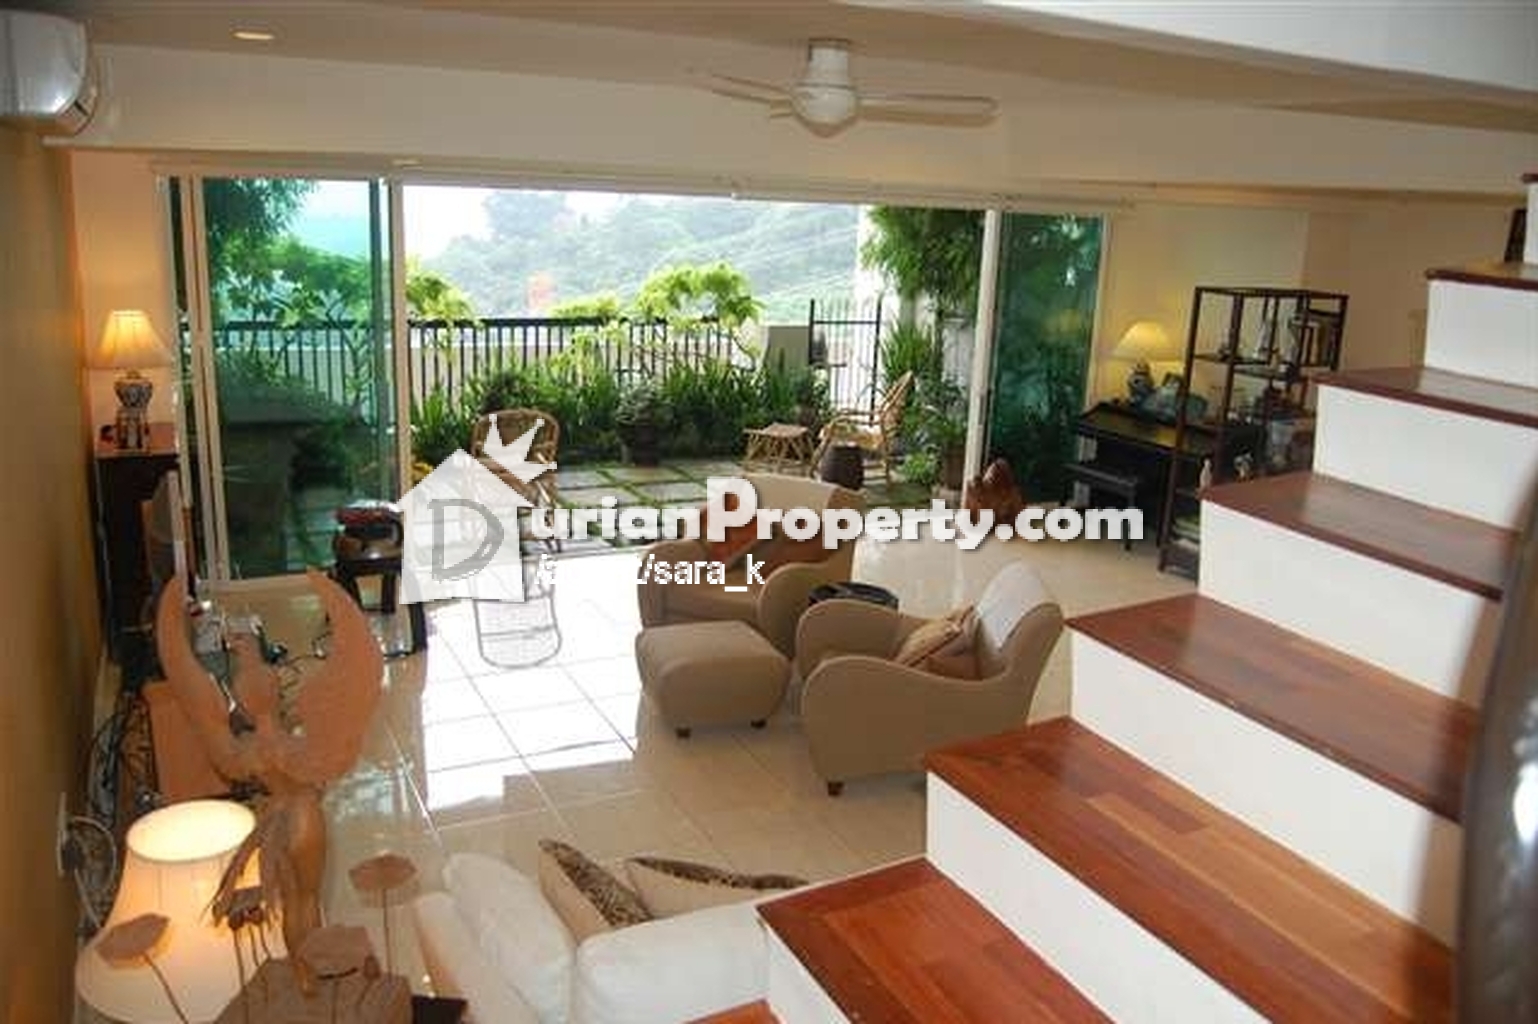 Condo For Auction At Armanee Terrace I Damansara Perdana For Rm 891 000 By Hannah Durianproperty